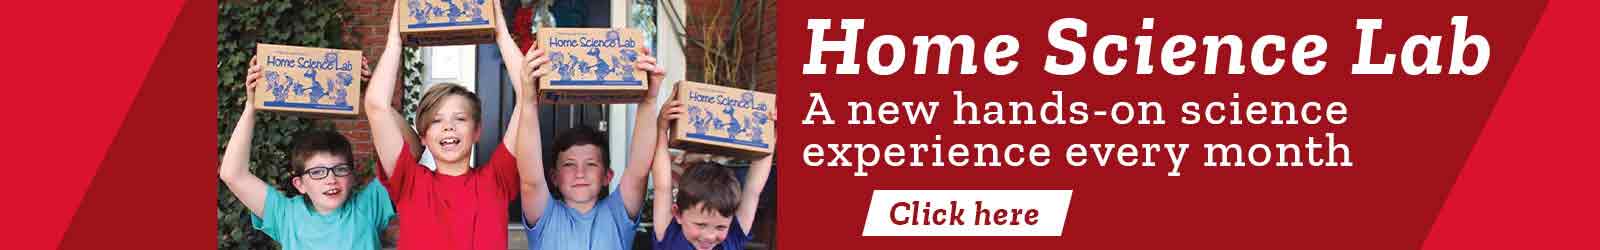 Home Science Lab A new hands-on science experience every month